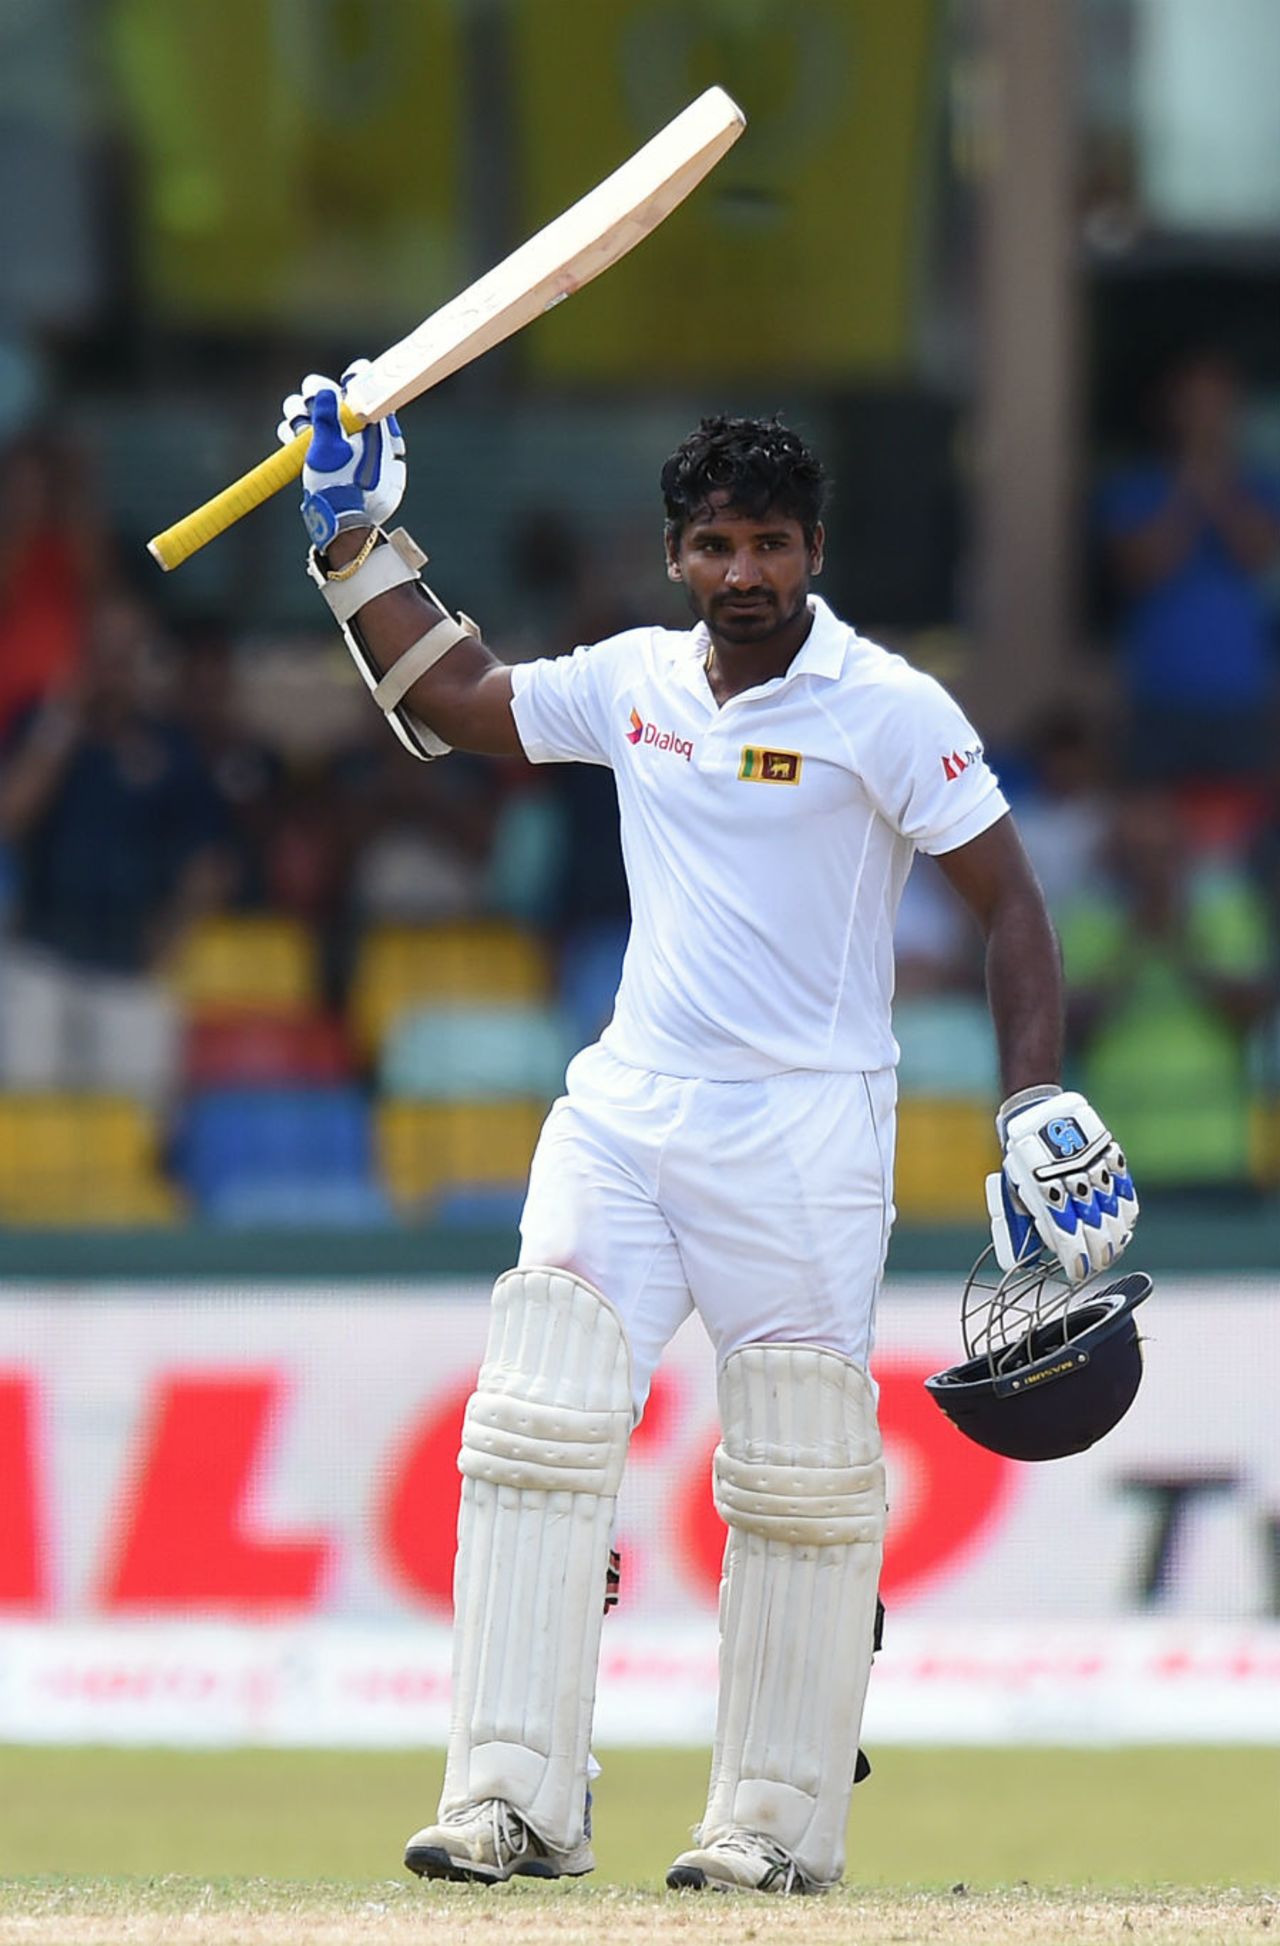 Kusal Perera raises the bat after his maiden Test fifty, Sri Lanka v India, 3rd Test, SSC, Colombo, 3rd day, August 30, 2015